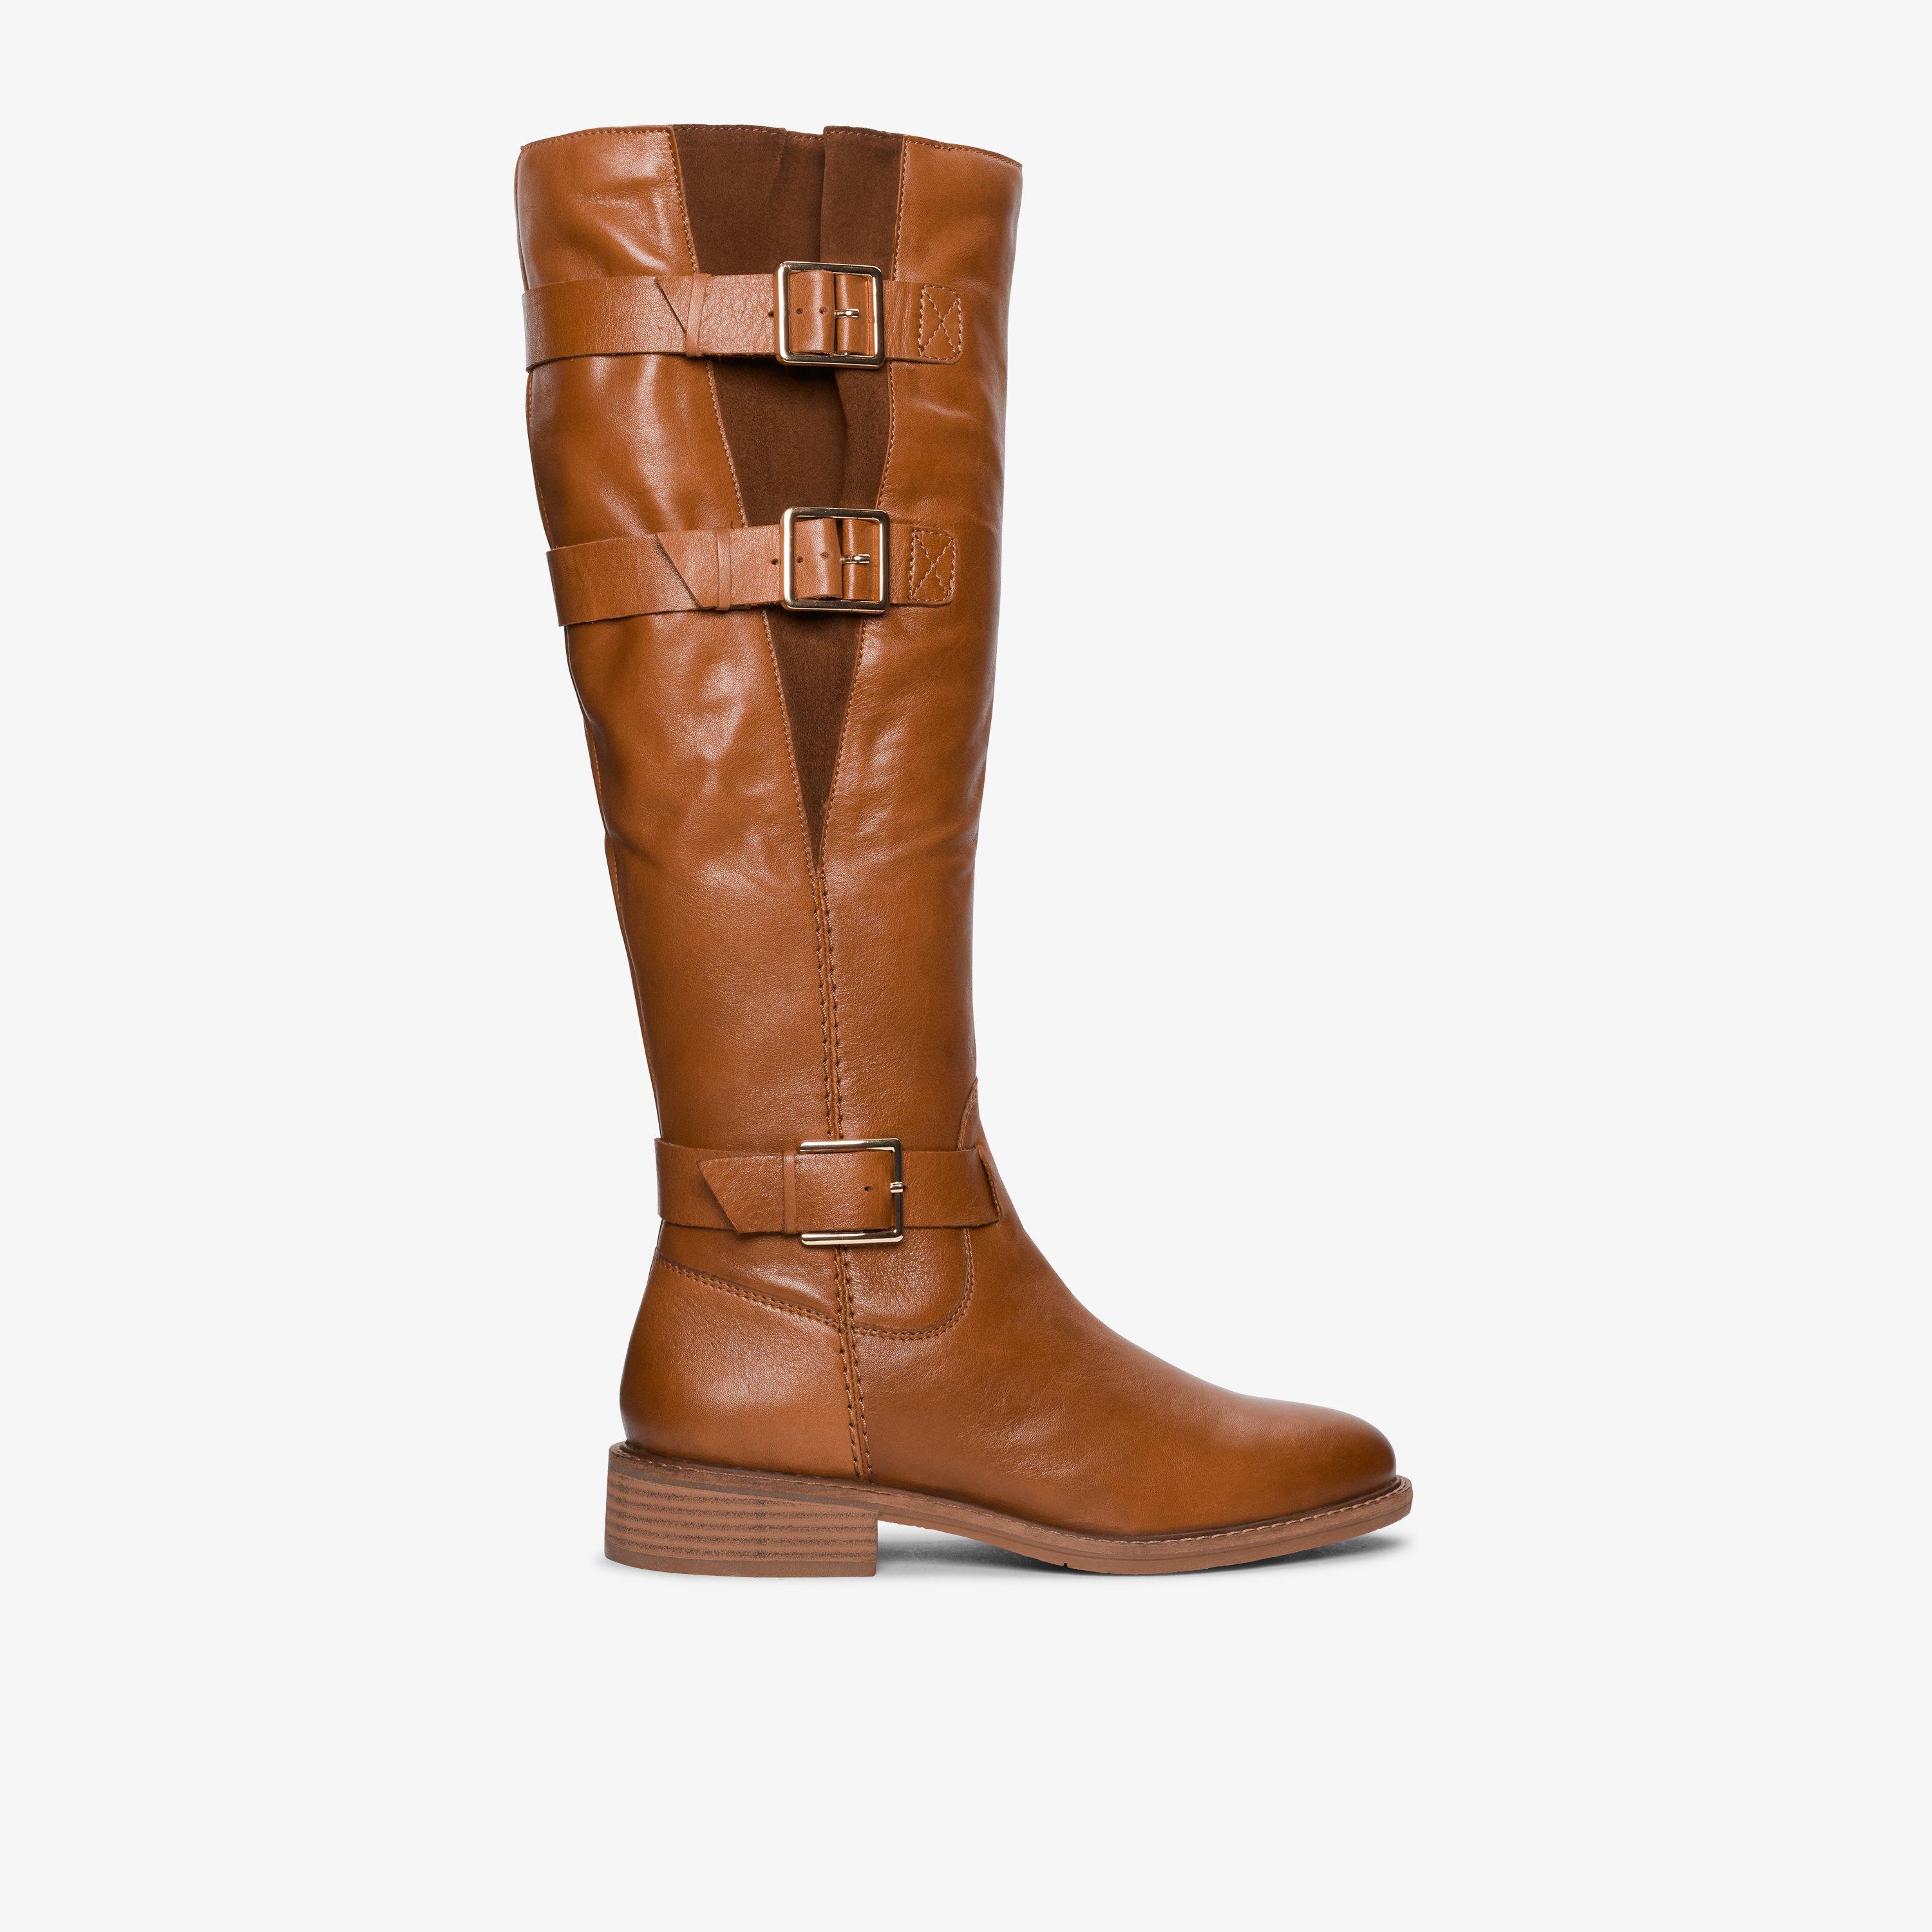 Bareback Footwear - Comfortable Country & Riding Boots - Free Returns